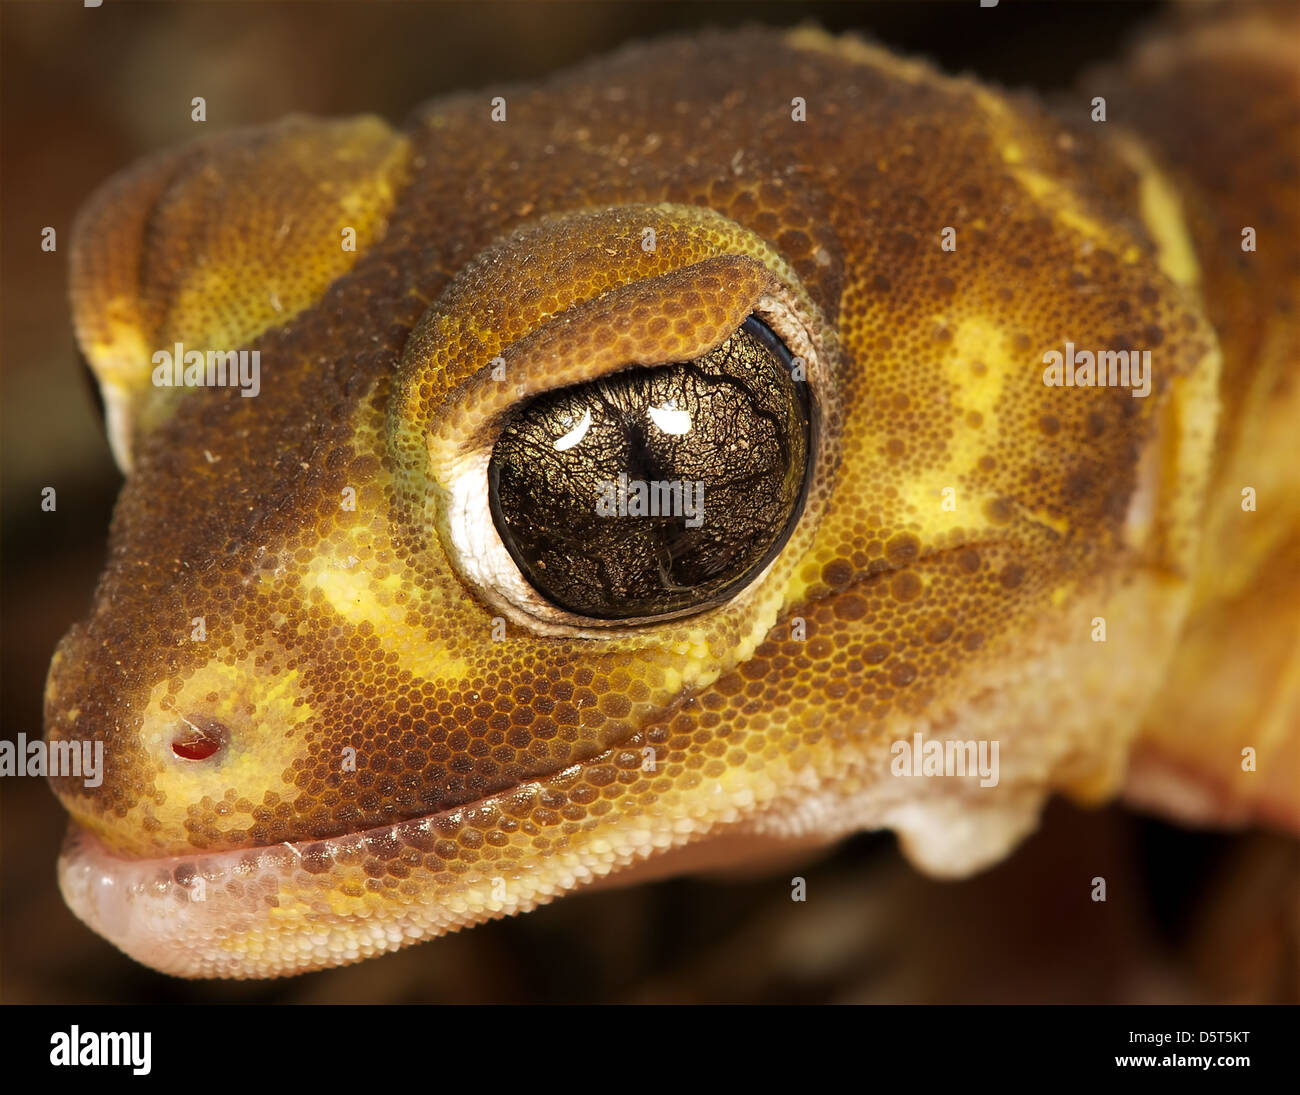 a close up of a brown gecko Stock Photo